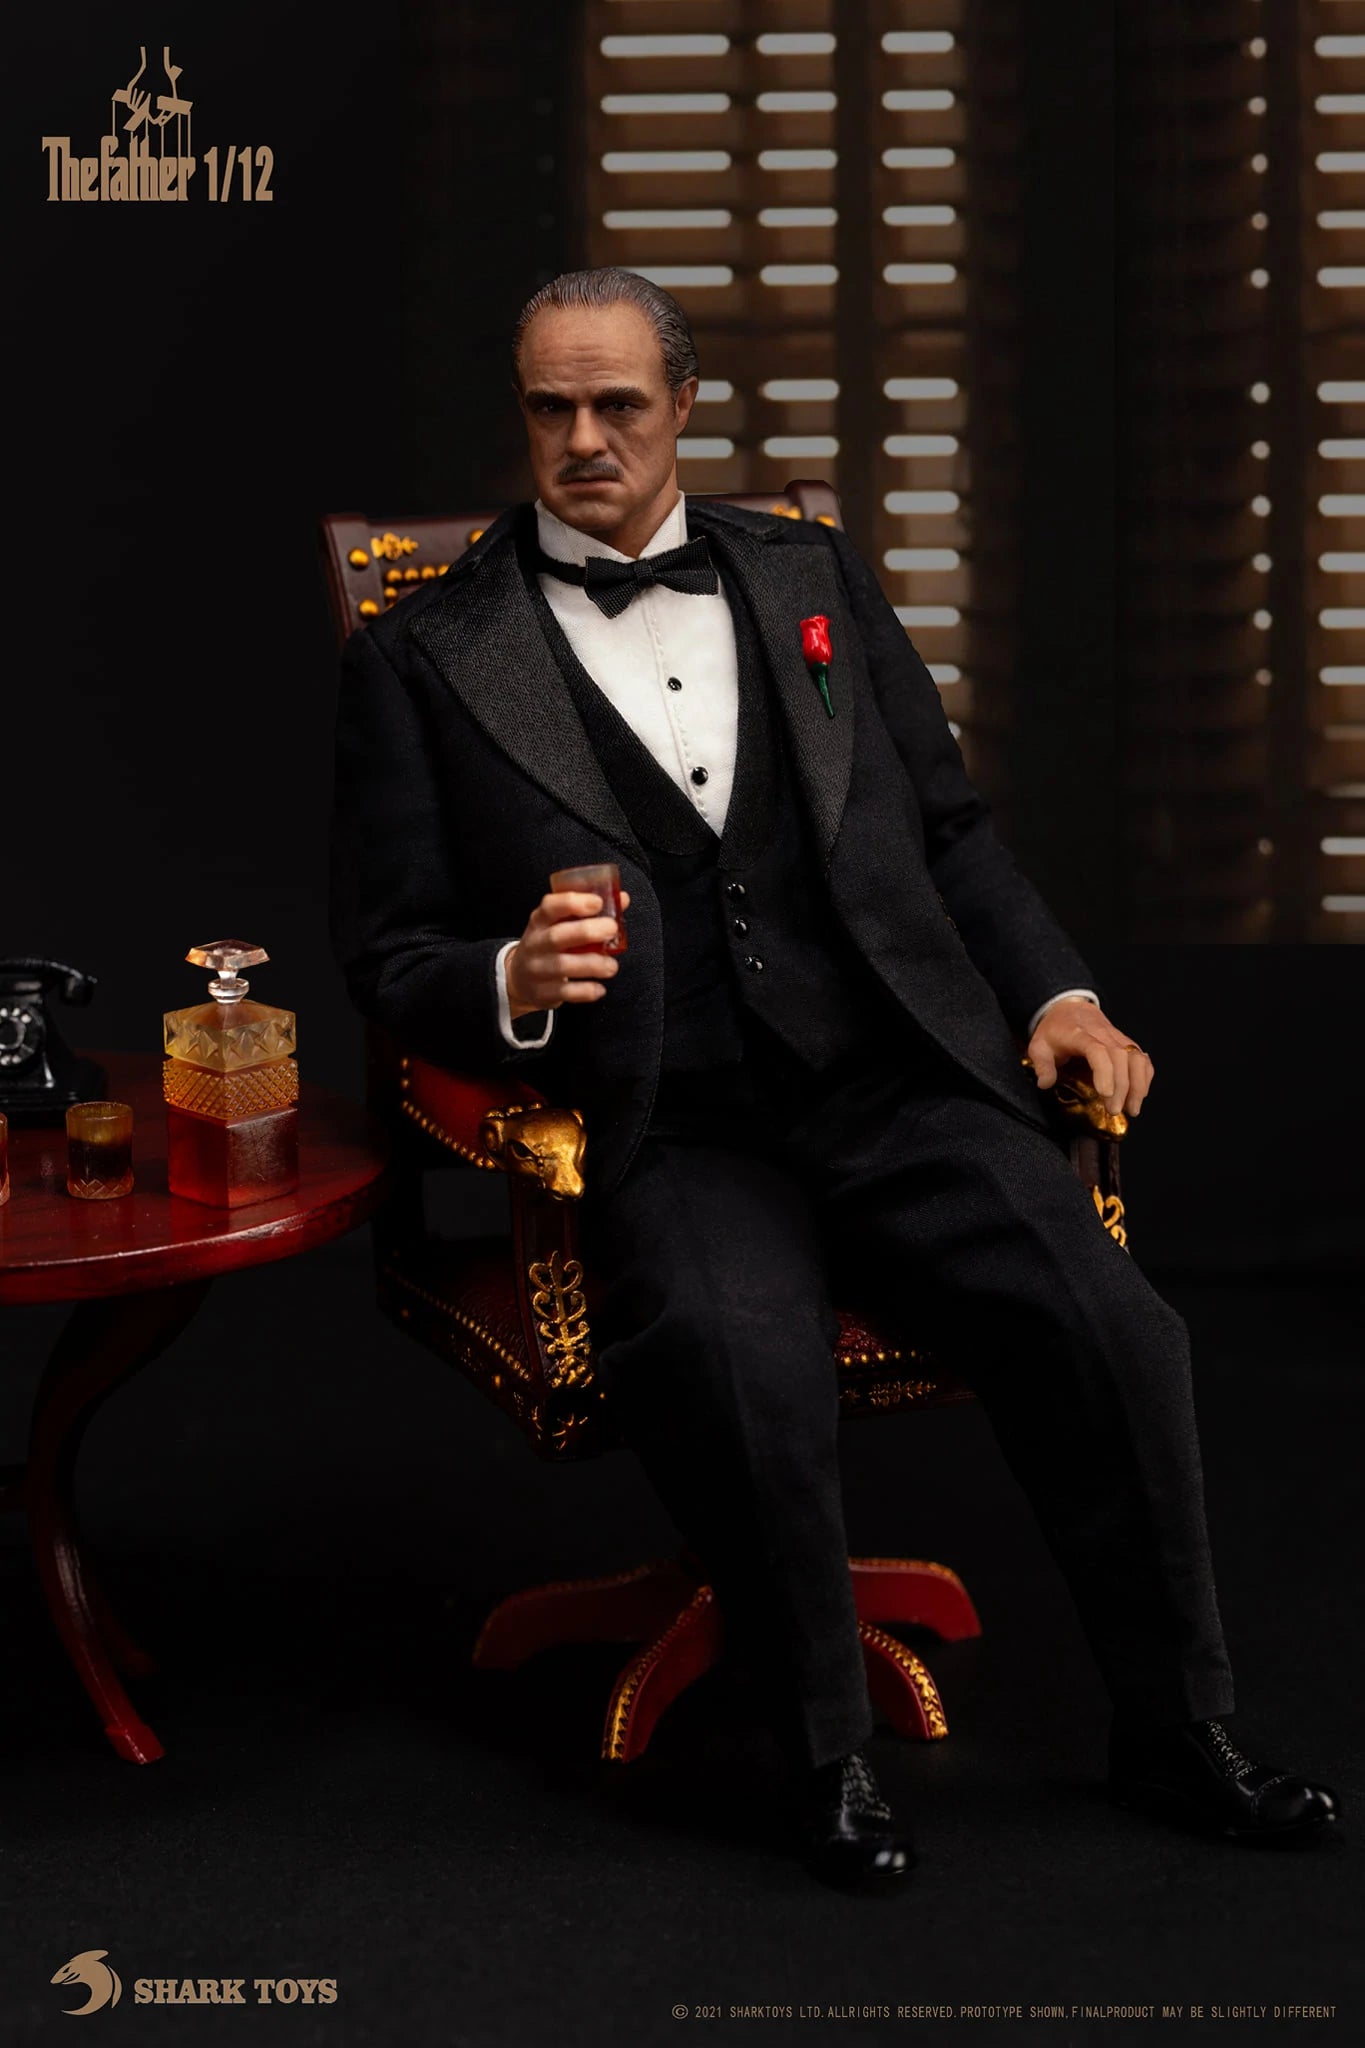 Shark Toys 1/12 The Father Twelfth Scale Action Figure